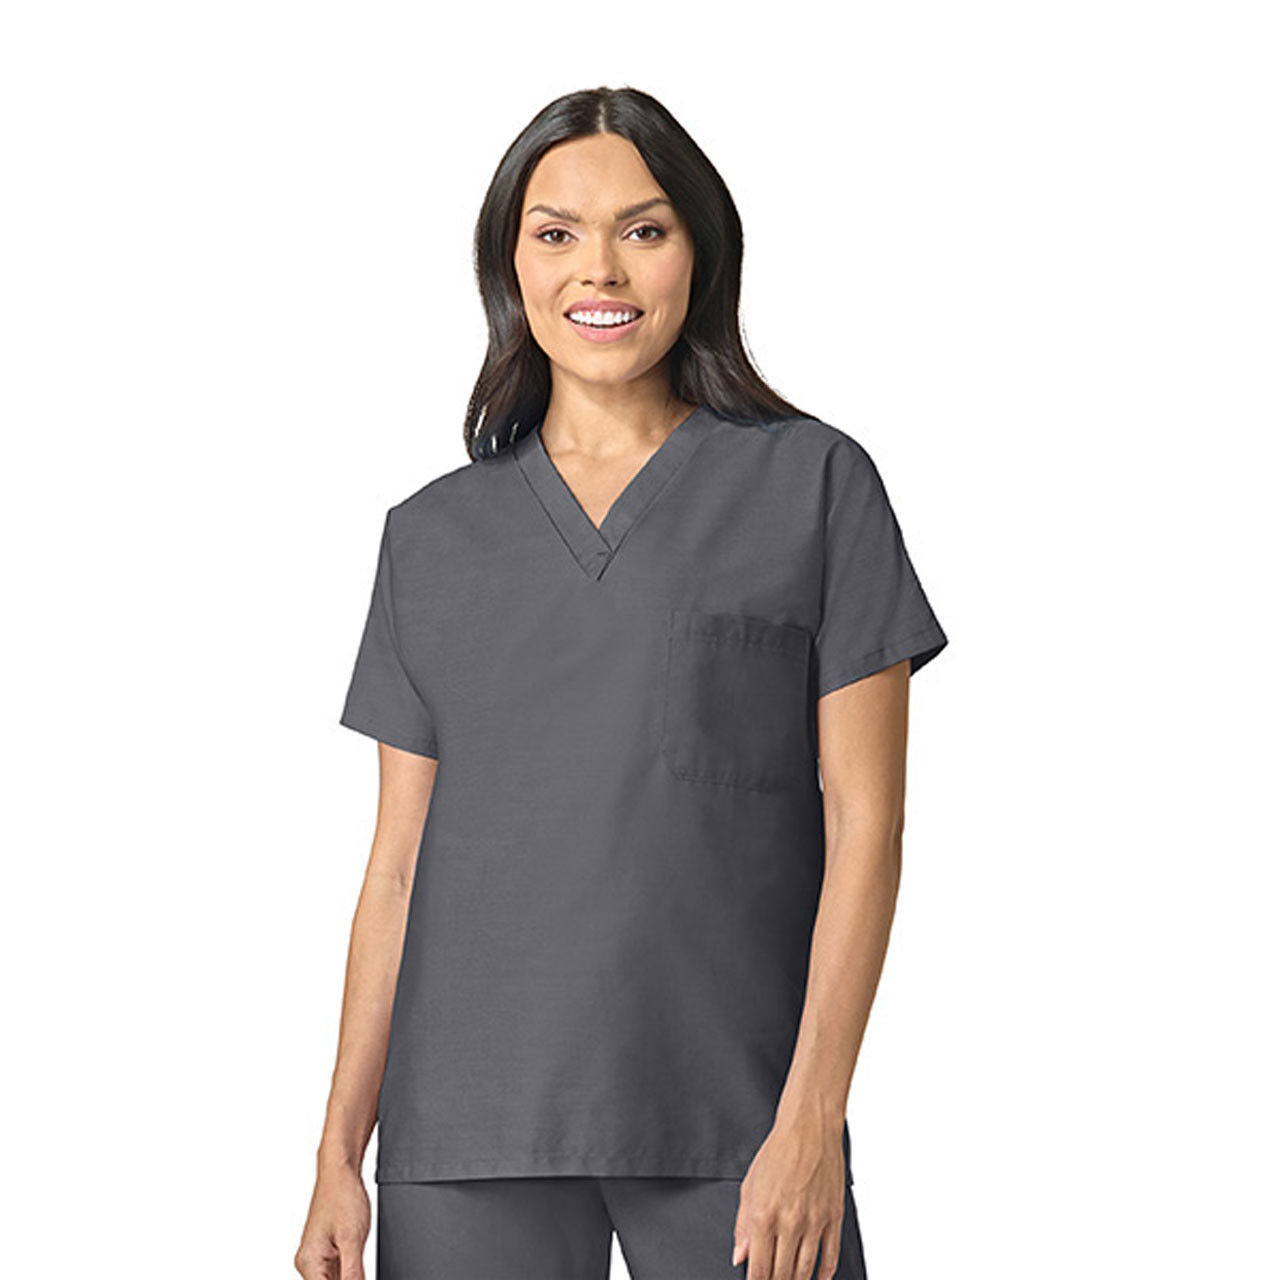 What industries are the Pewter Gray Scrub Tops suitable for?